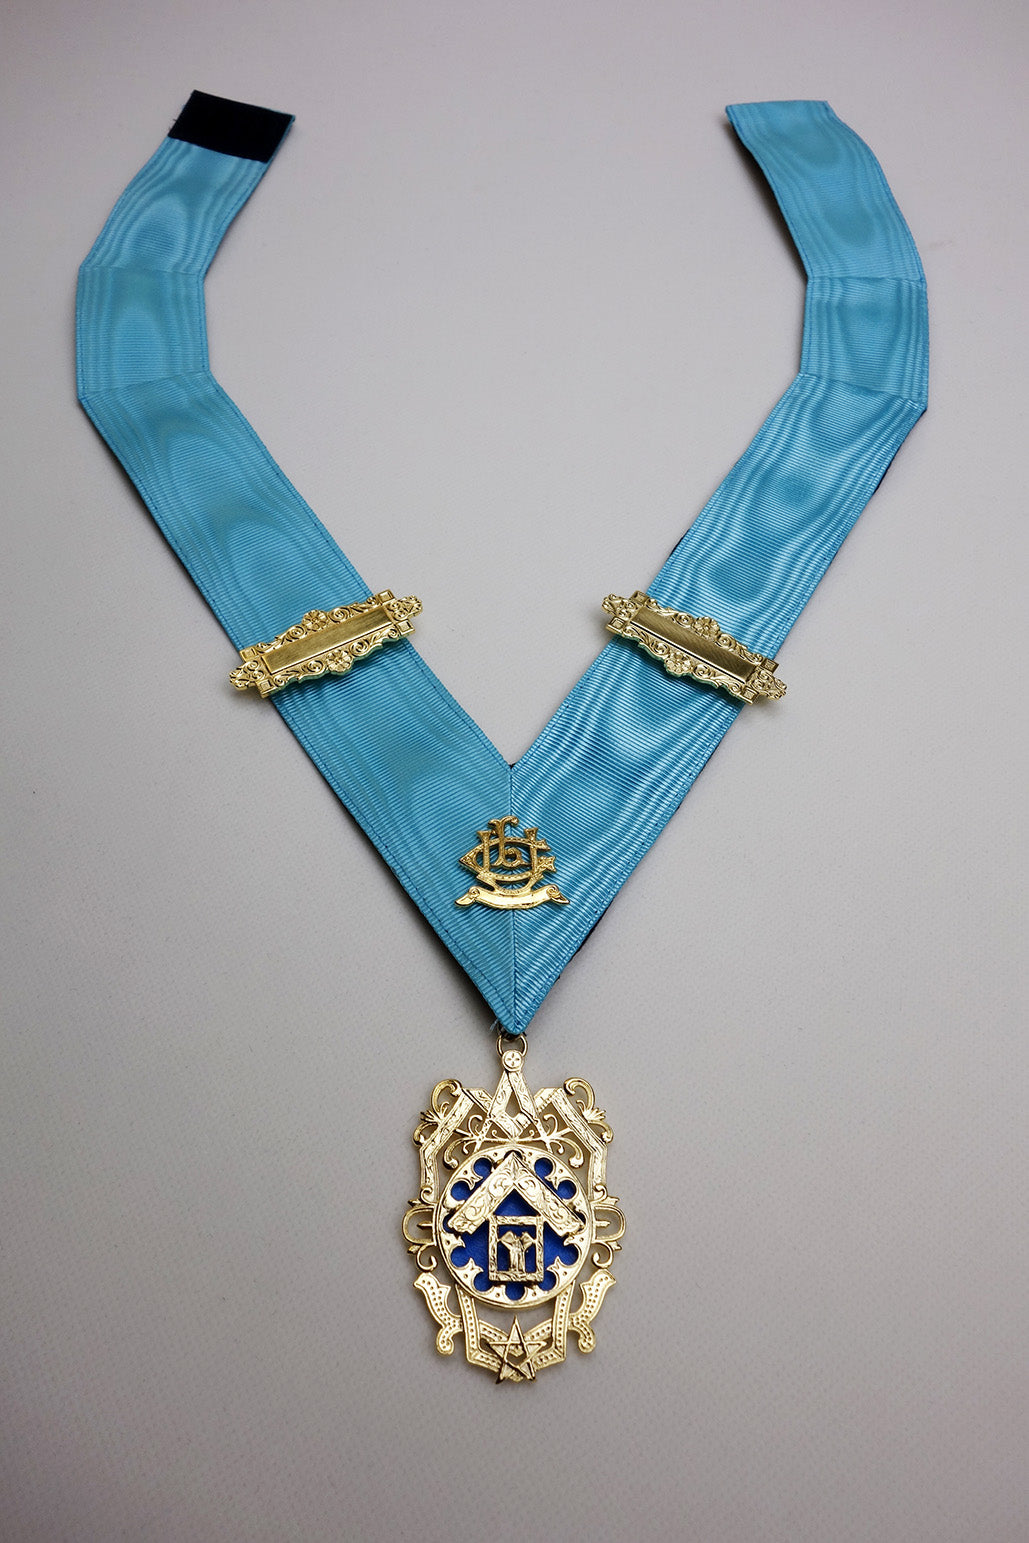 Convert Past Master Jewel to Jewel with Collarette